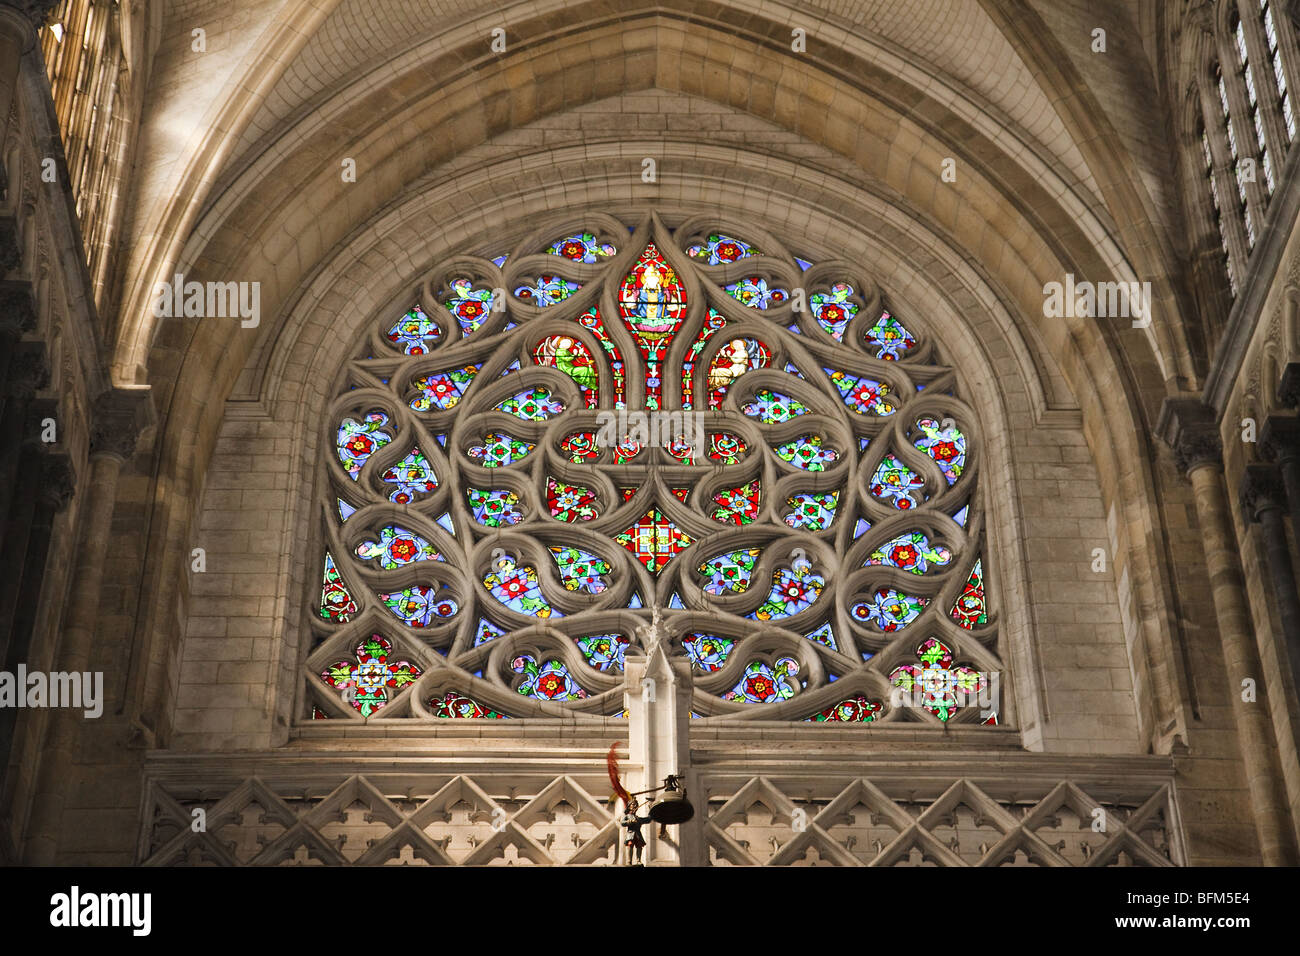 Glass stained window in cathedral Stock Photo